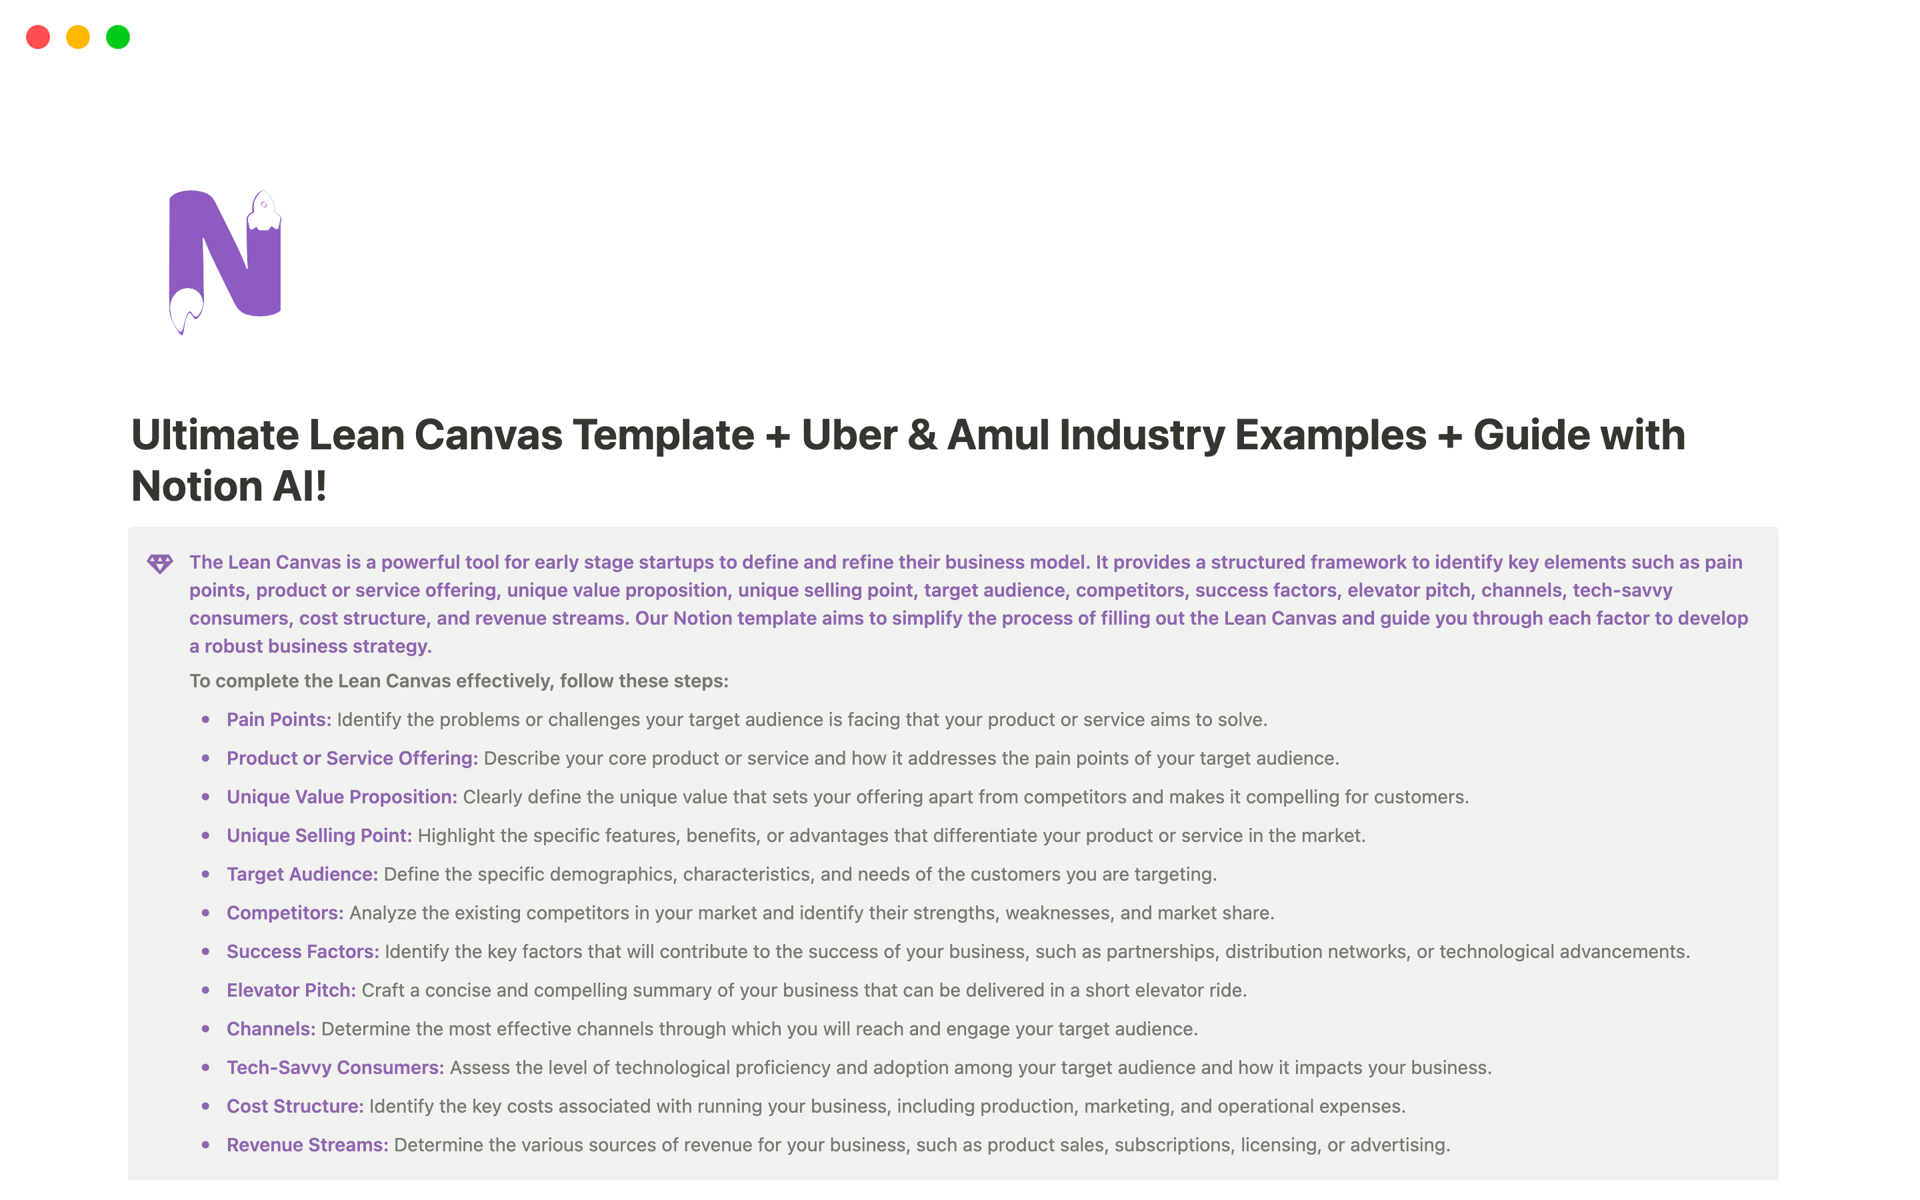 A template preview for Ultimate Lean Canvas with examples of Uber & Amul